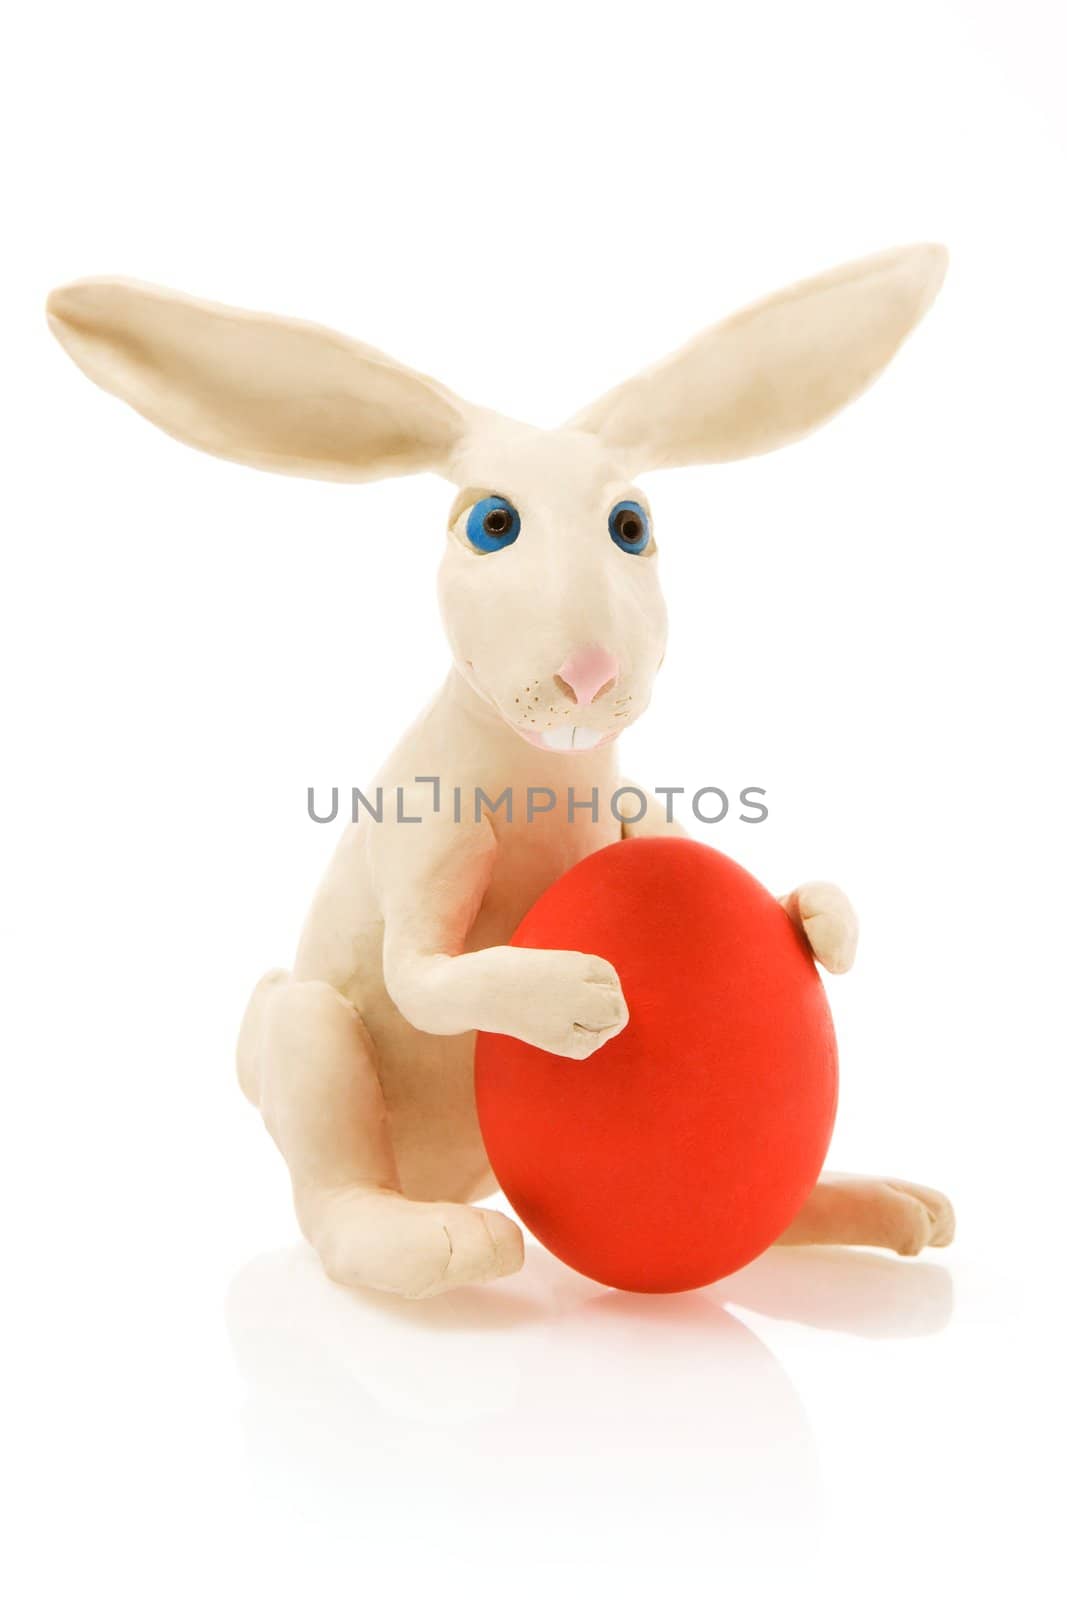  White toy rabbit with red egg.The image contains a path
